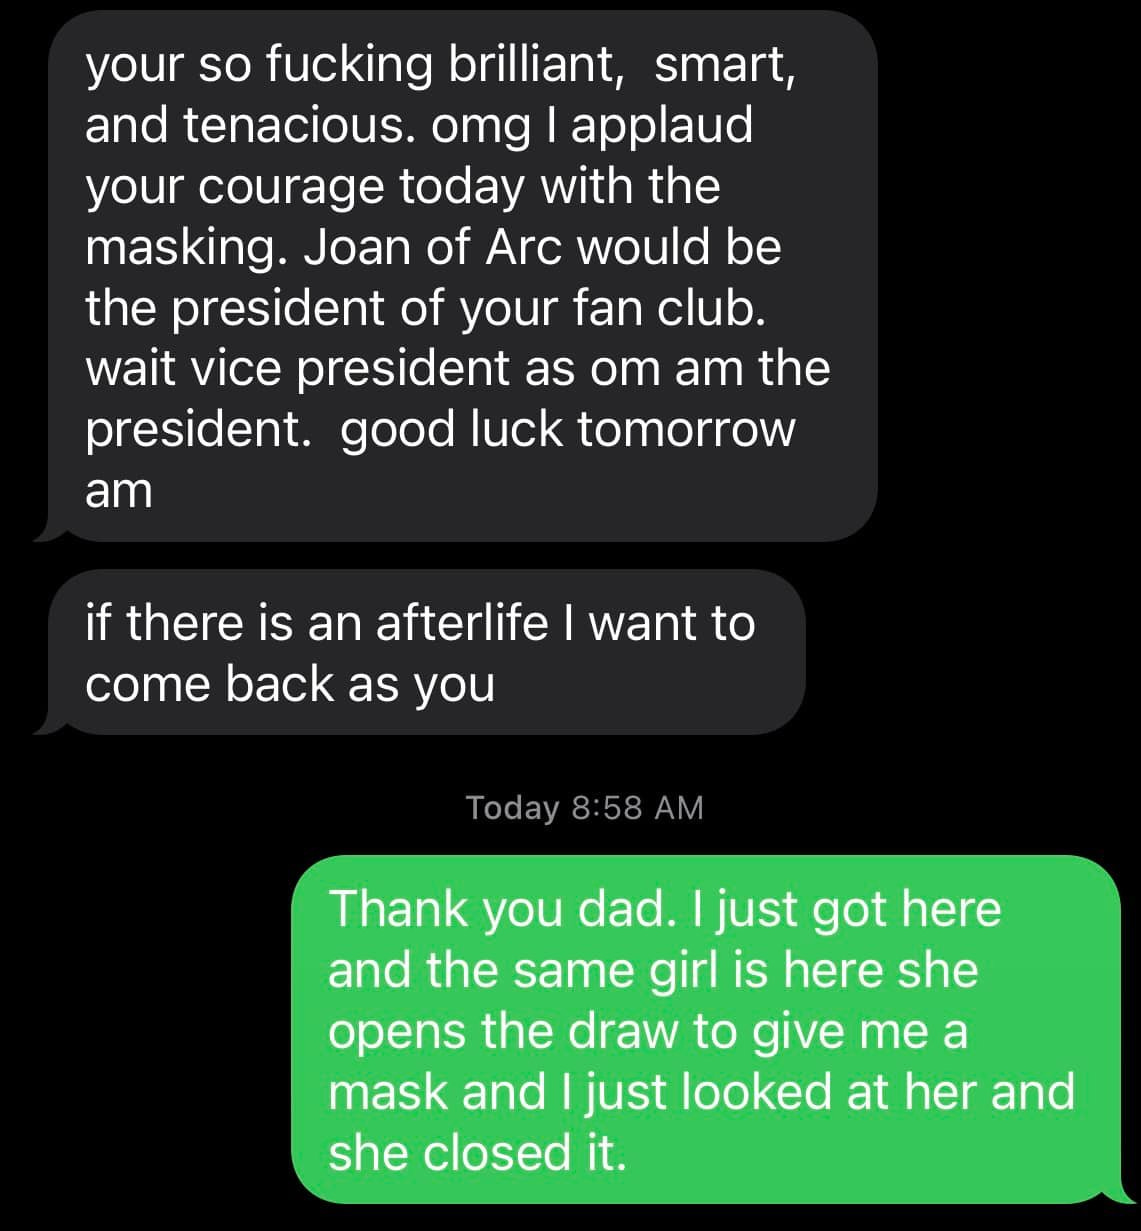 May be an image of text that says 'your so fucking brilliant, smart, and tenacious. omg applaud your courage today with the masking Joan of Arc would be the president of your fan club. wait vice president as om am the president. good luck tomorrow am if there is an afterlife come back as you want to Today 8:58 AM Thank you dad. just got here and the same girl is here she opens the draw to give me a mask and just looked at her and she closed it.'